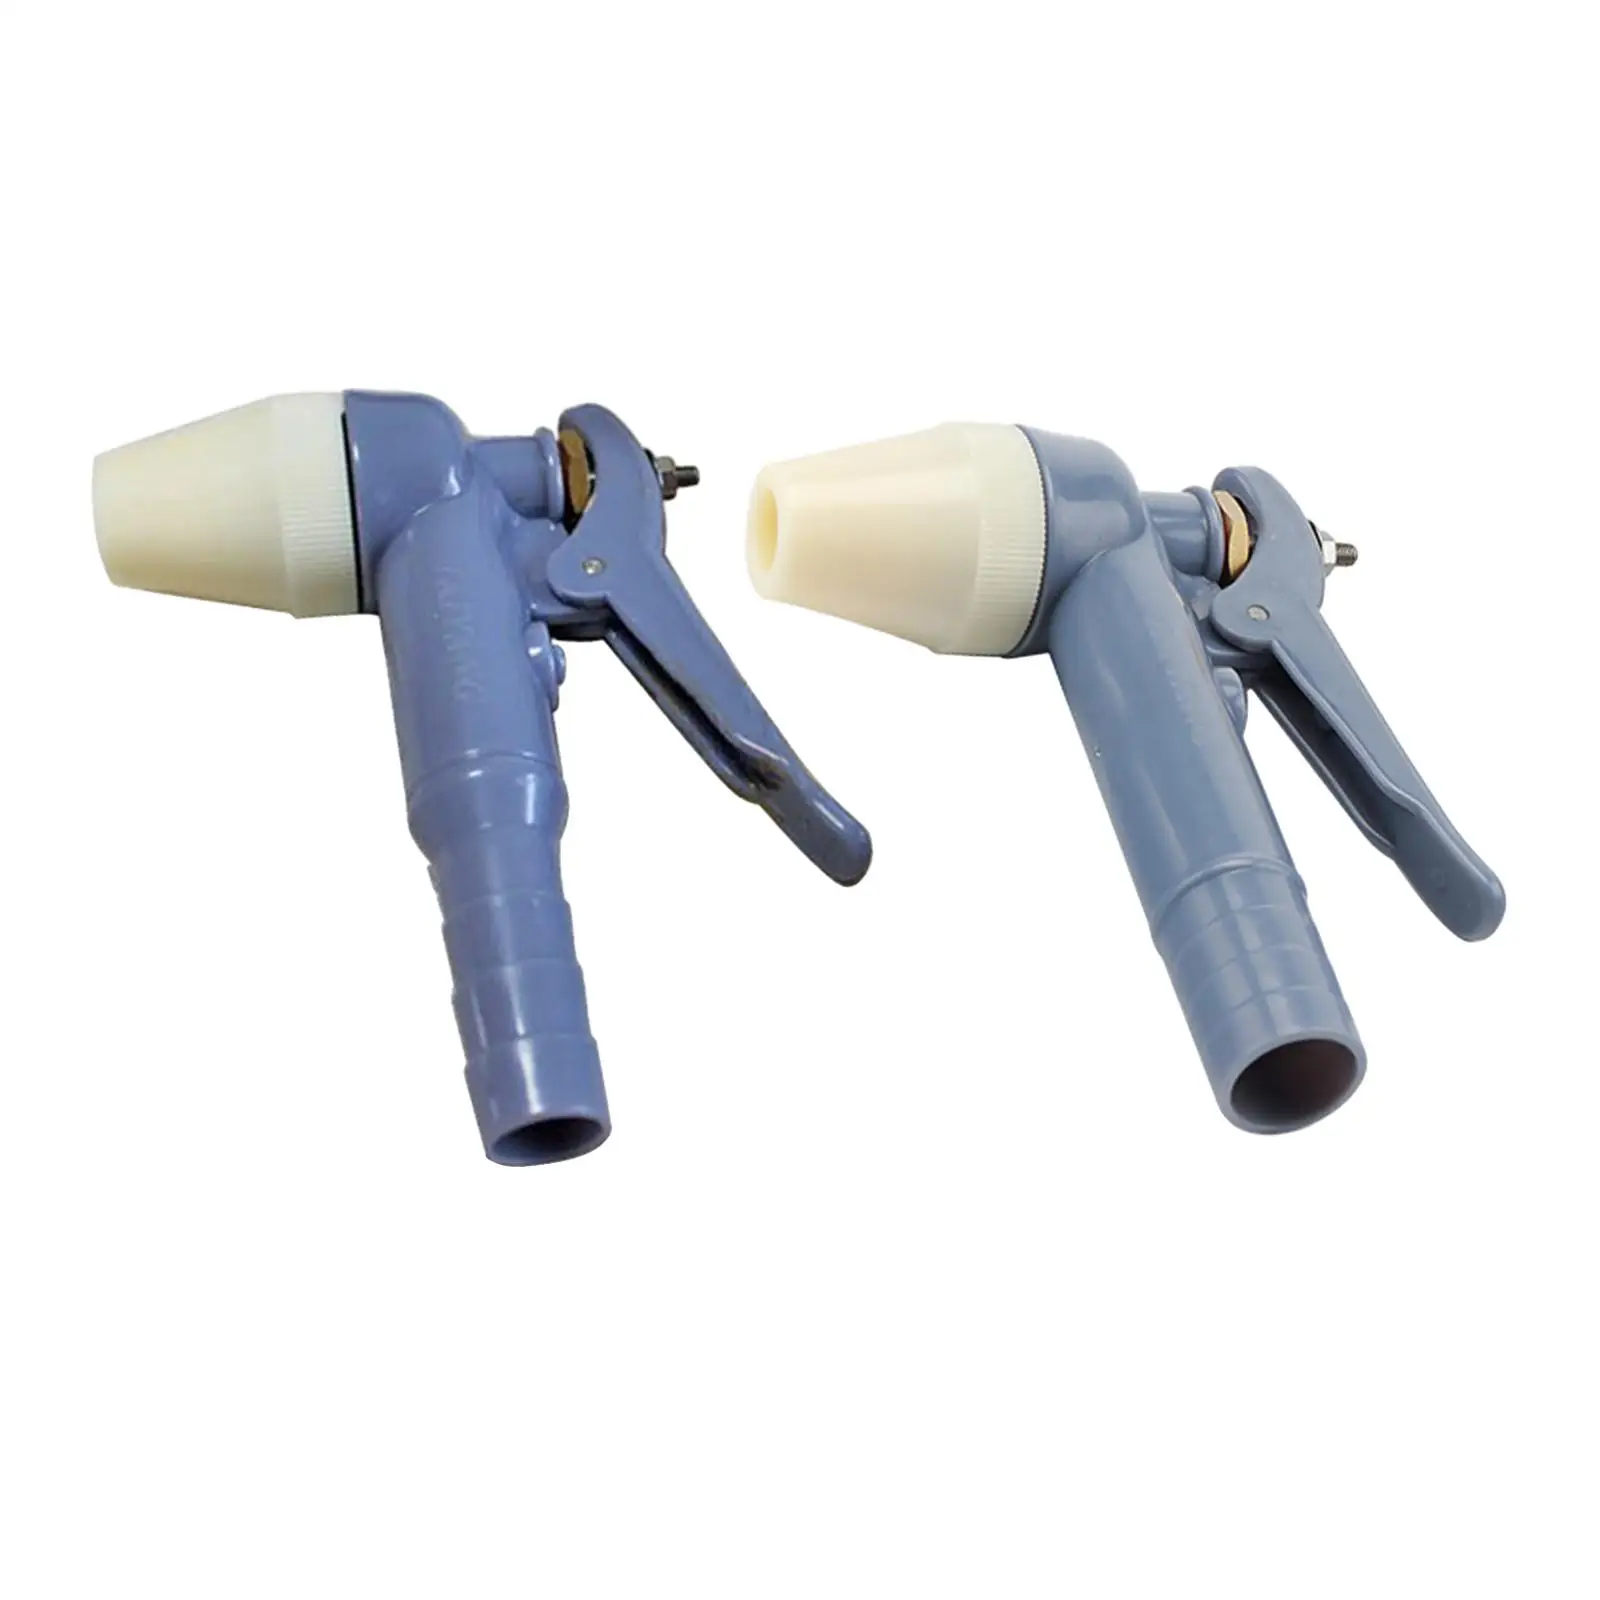 Mortar Grouting Gun Replacable Nozzles Outdoor Indoor for Grouting Machine Pipeline Grouting Fitings Fast and Easy Grouting Gun